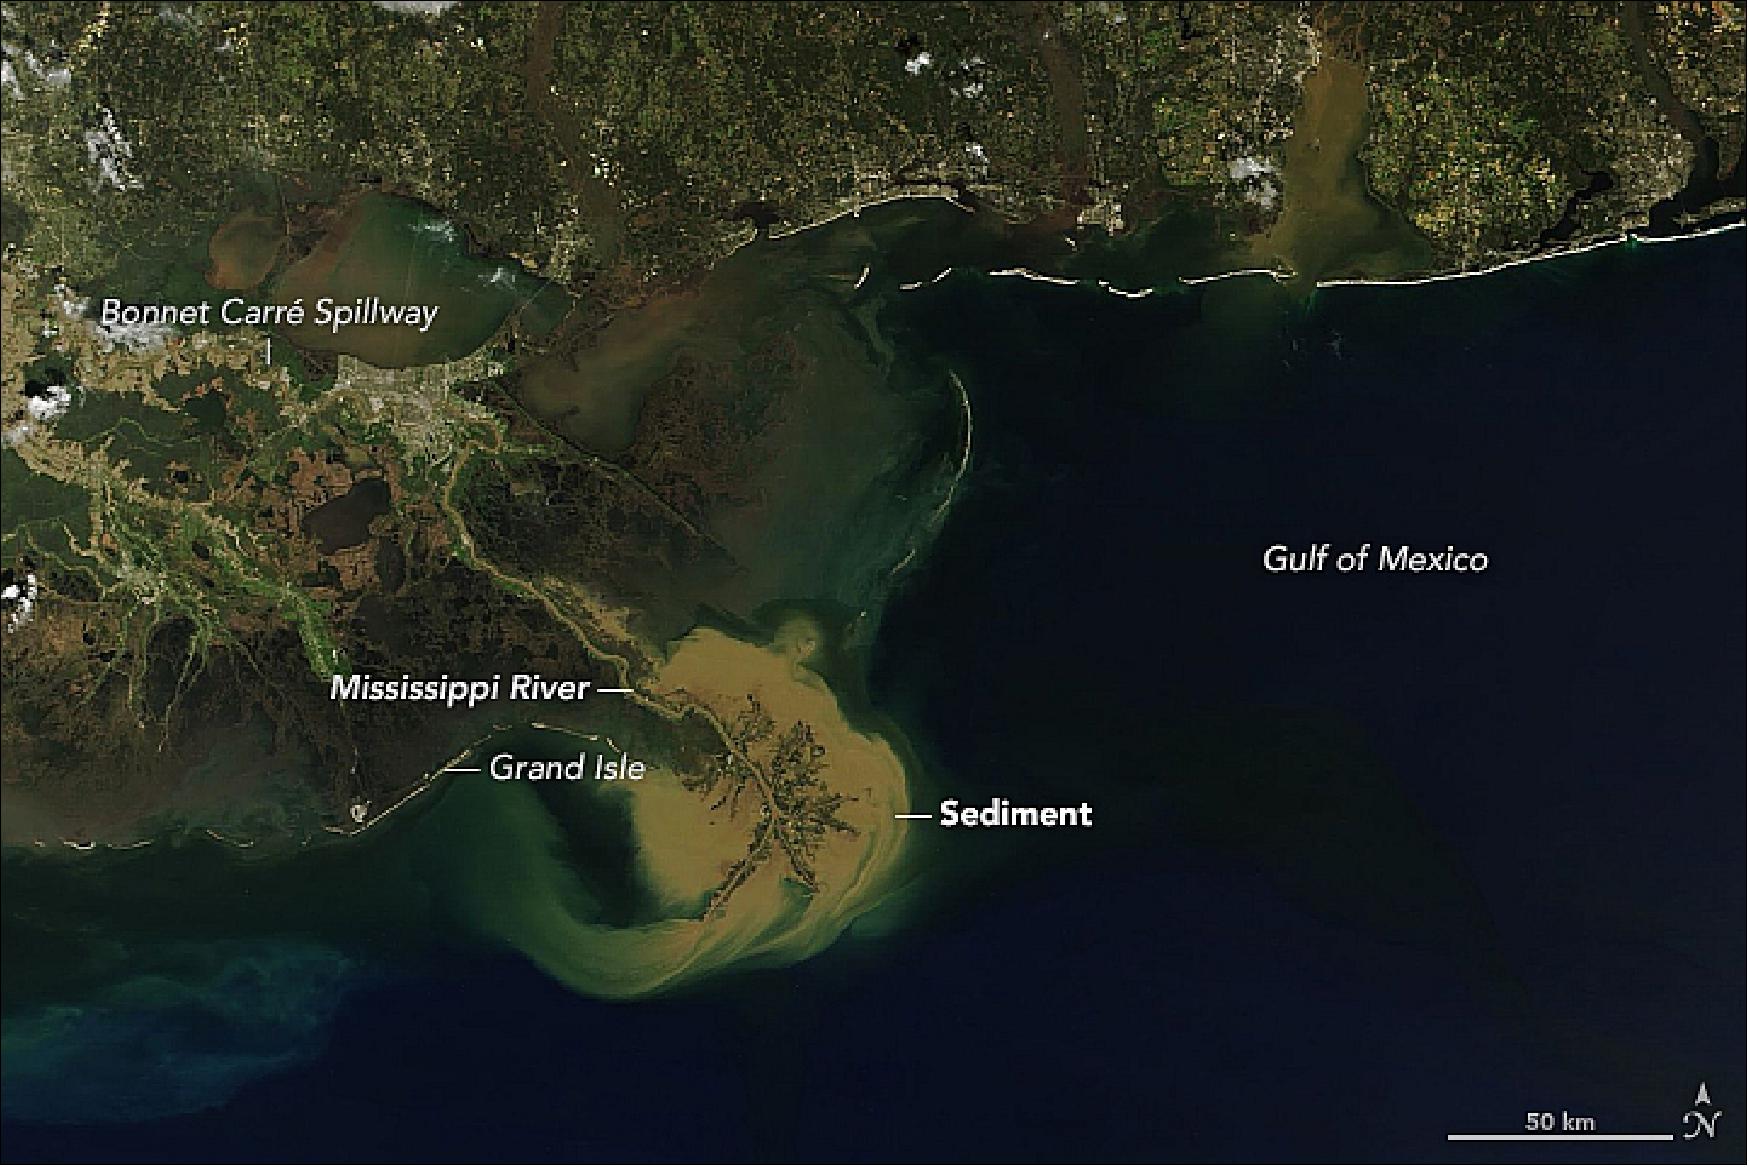 Figure 31: On March 4, 2018, MODIS on NASA’s Terra satellite acquired this image of the sediment plume spilling into the Gulf of Mexico (image credit: NASA Earth Observatory, image by Joshua Stevens, using MODIS data from LANCE/EOSDIS Rapid Response, story by Kathryn Hansen with image interpretation by Nan Walker and Alex Kolker)